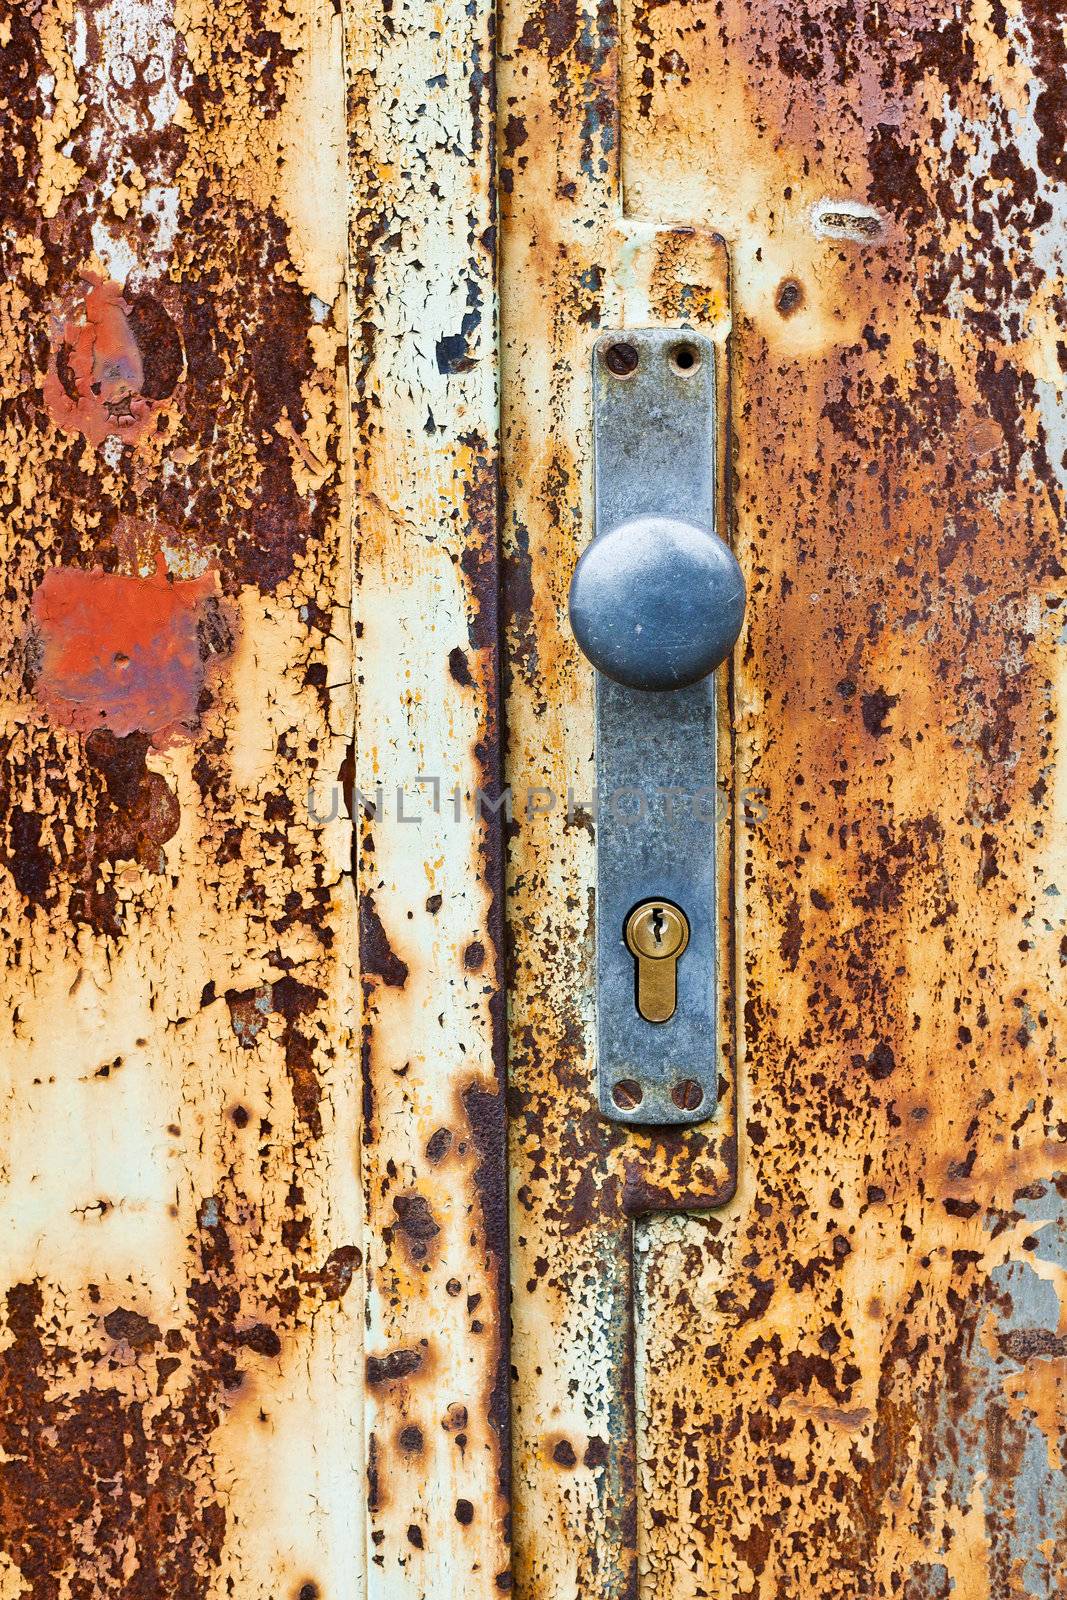 An old rusty gate door and lock